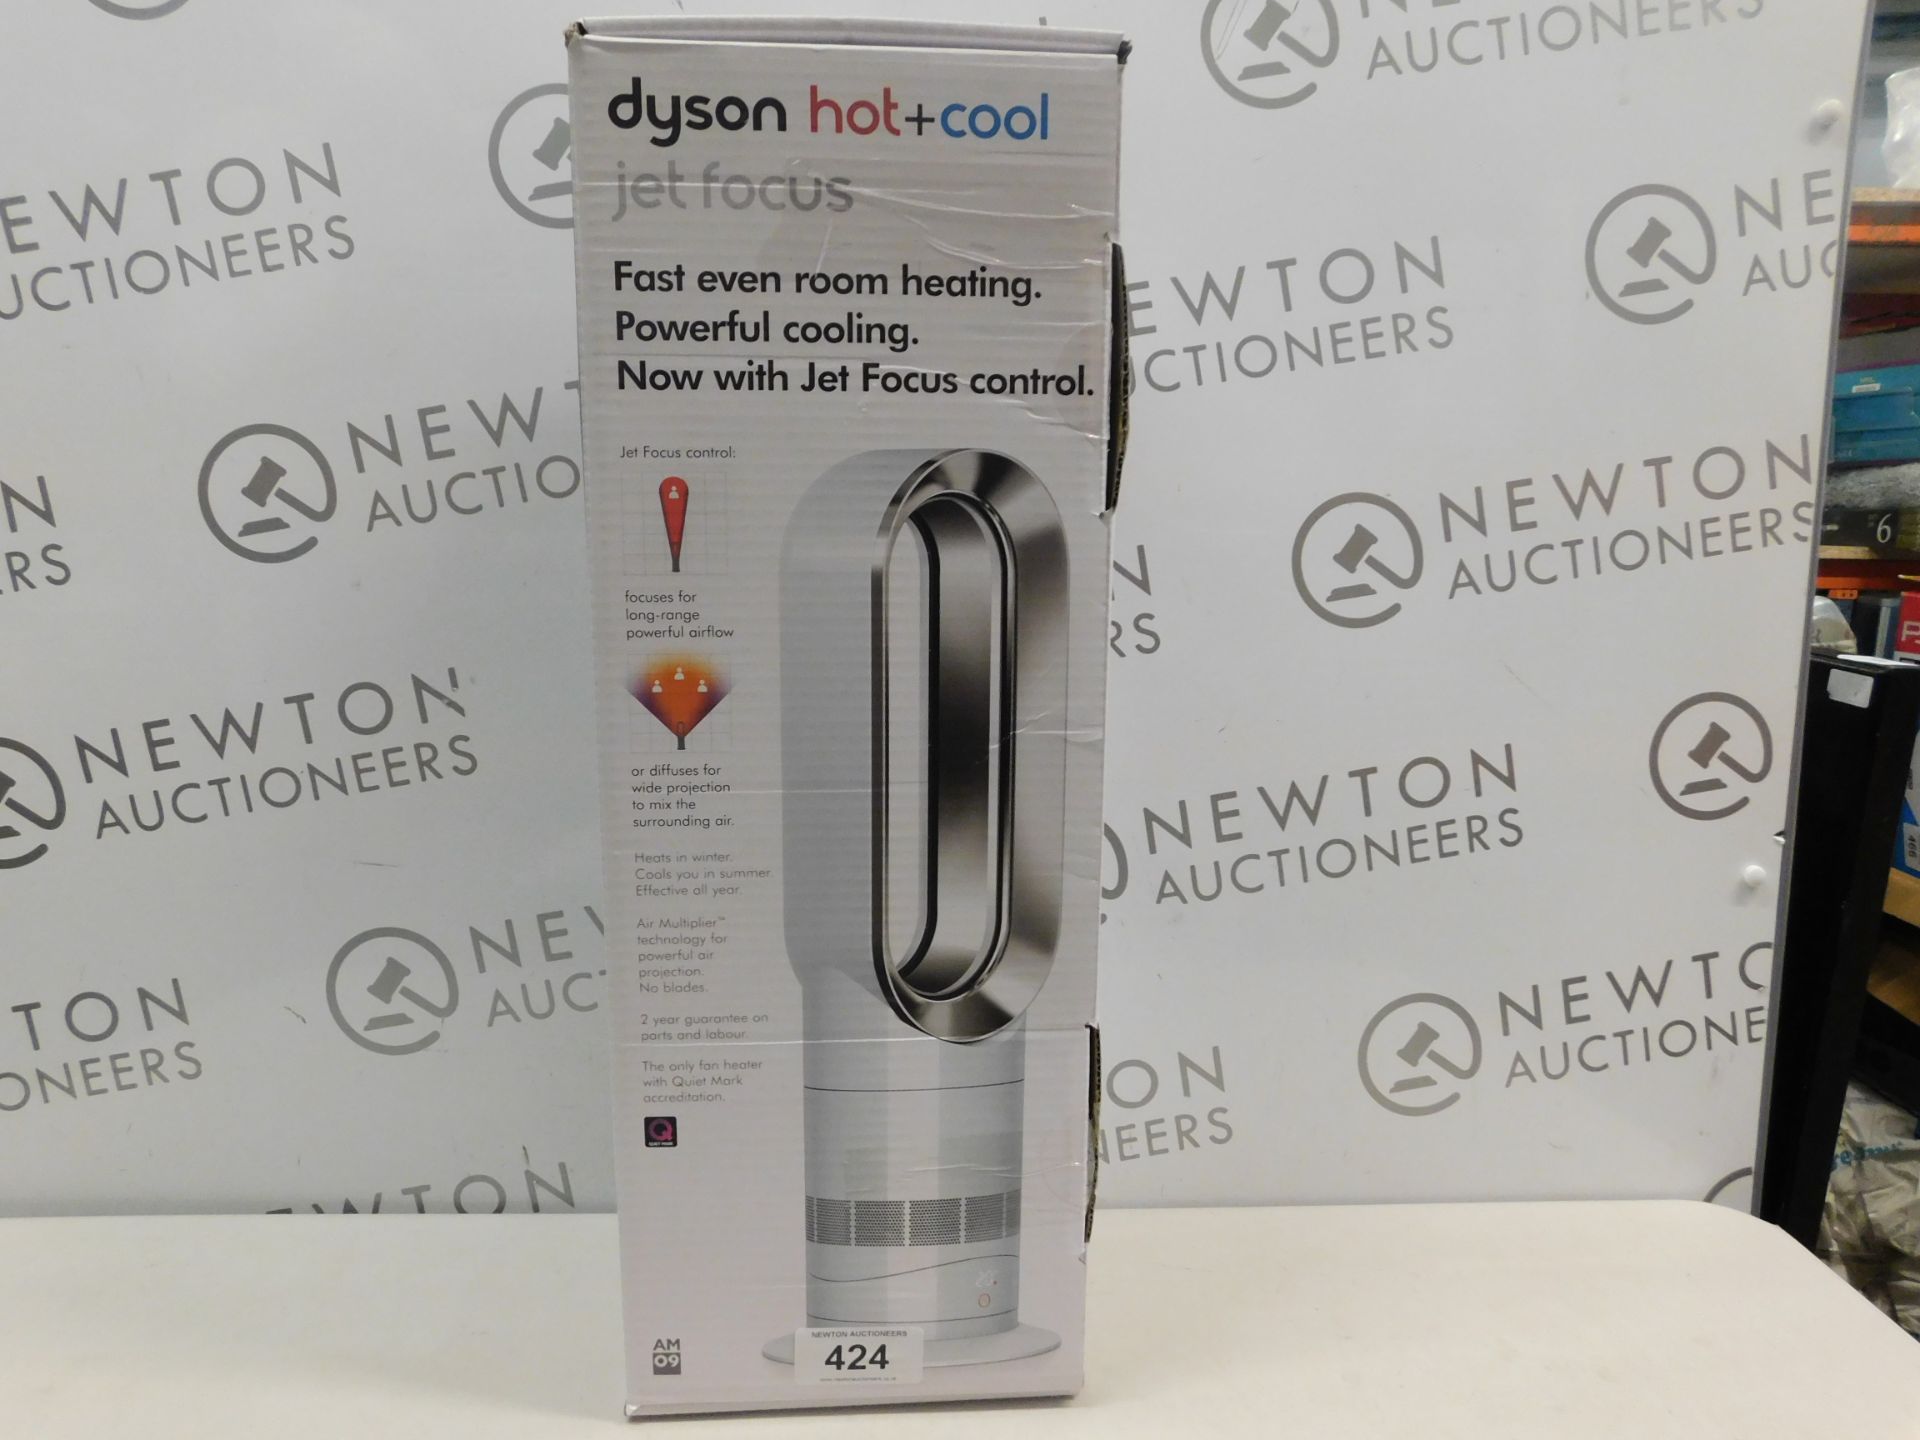 1 BOXED DYSON AM09 HOT AND COOL JET FOCUS FAN WITH REMOTE CONTROL RRP £399 (EXCELLENT CONDITION)